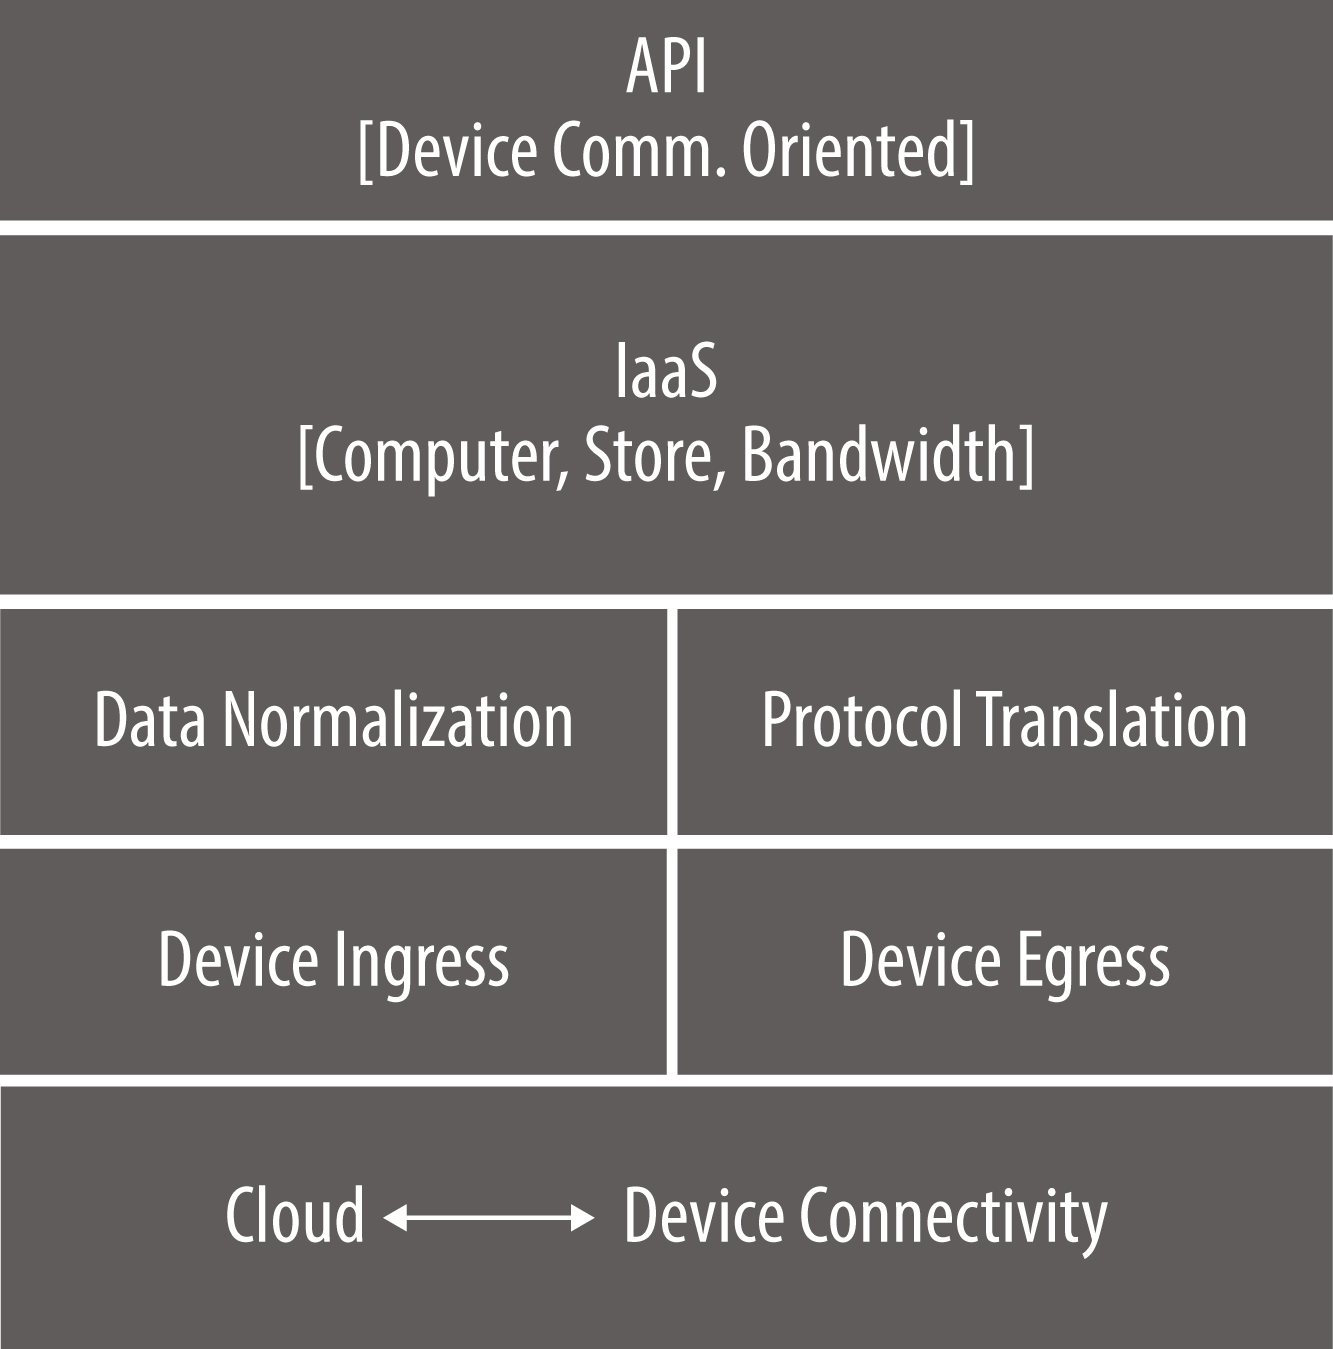 The device cloud is the central station of an IoT solution, processing and analyzing data received from the edge